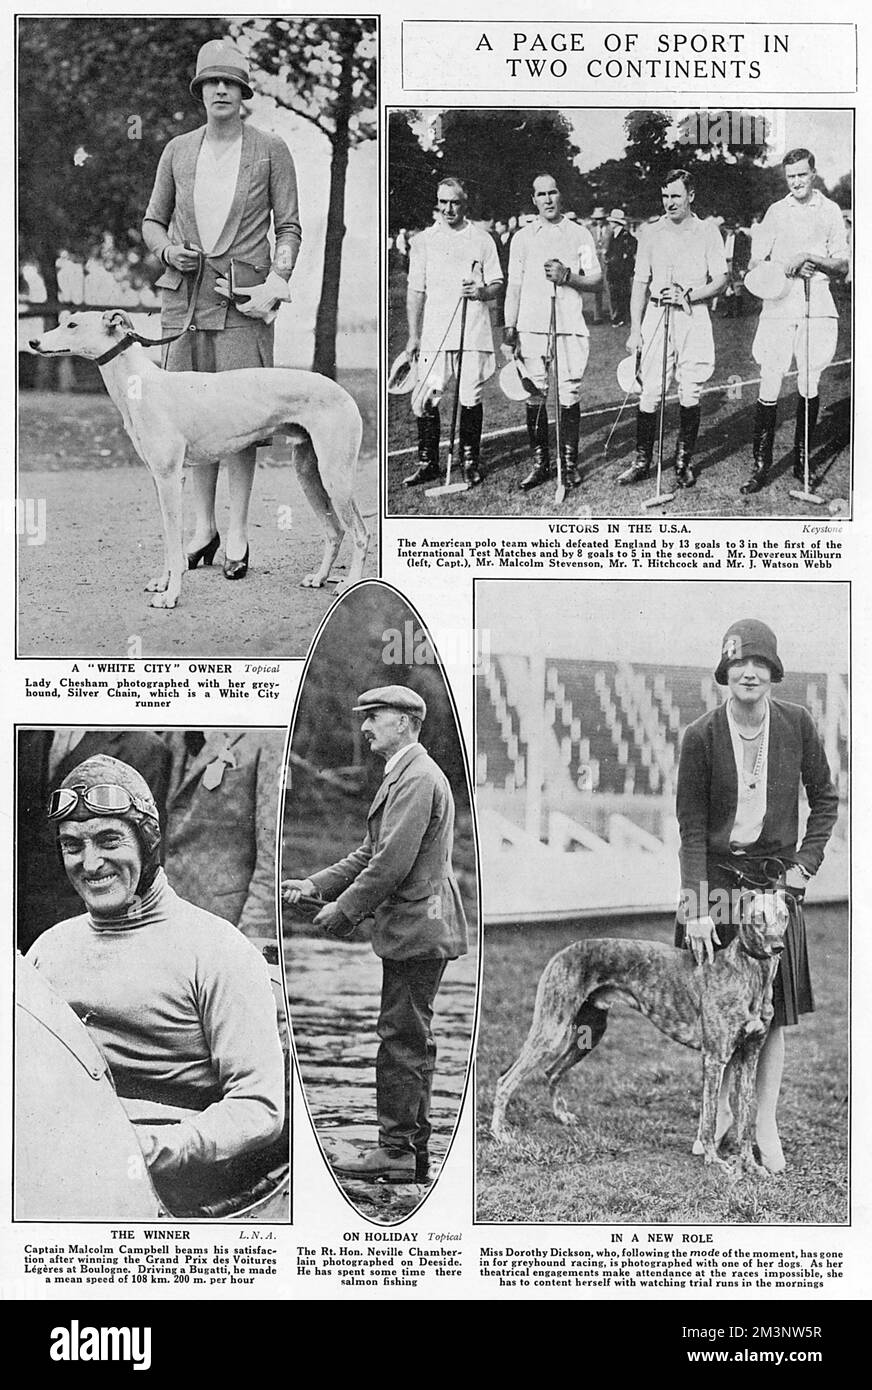 Page from the Bystander showing, from top left, lady Chesham with her greyhound, Silver Chain, a runner at White City stadium, The American polo team which defeated England by 13 goals to 3 in the first International Test Match and by 8 goals to 5 in the second, Miss Dorothy Dickson, actress, photographed with one of her greyhounds, the sport being described by the Bystander as 'the mode of the moment', the Rt Hon Neville Chamberlain photographed on Deeside salmon fishing and finally, Captain Malcolm Campbell beaming with satisfaction after winning the Grand Prix des Voitures Legeres at Boulog Stock Photo